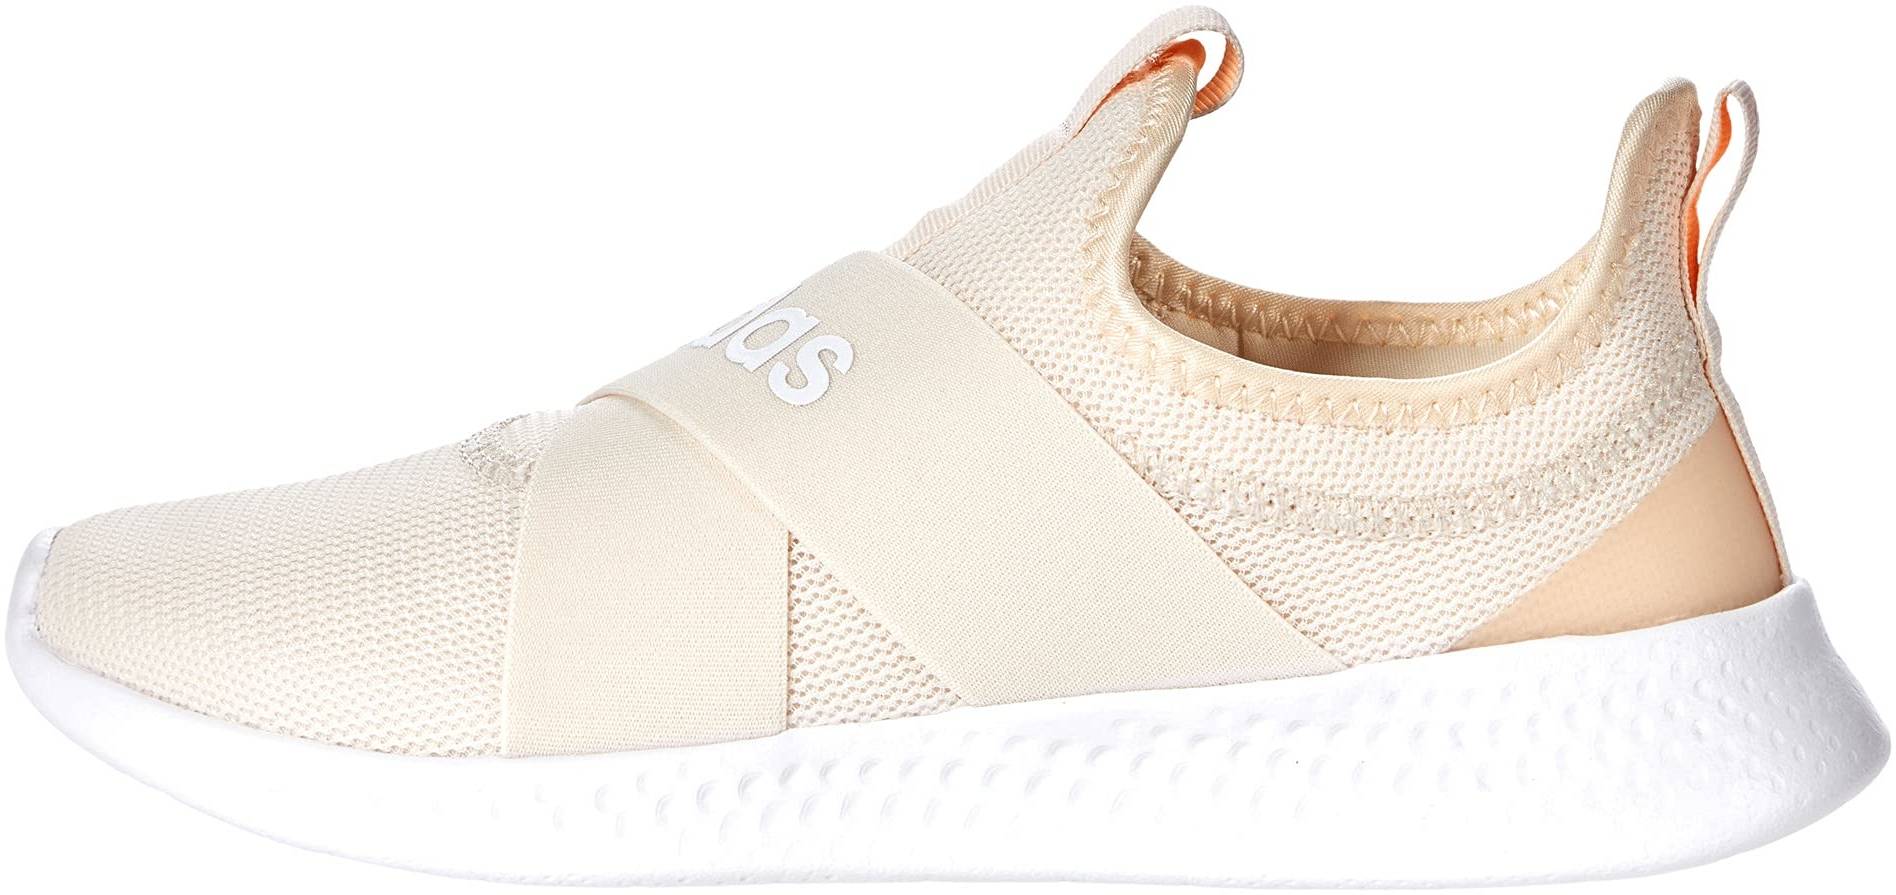 Adidas Puremotion Adapt sneakers in white (only $39) | RunRepeat